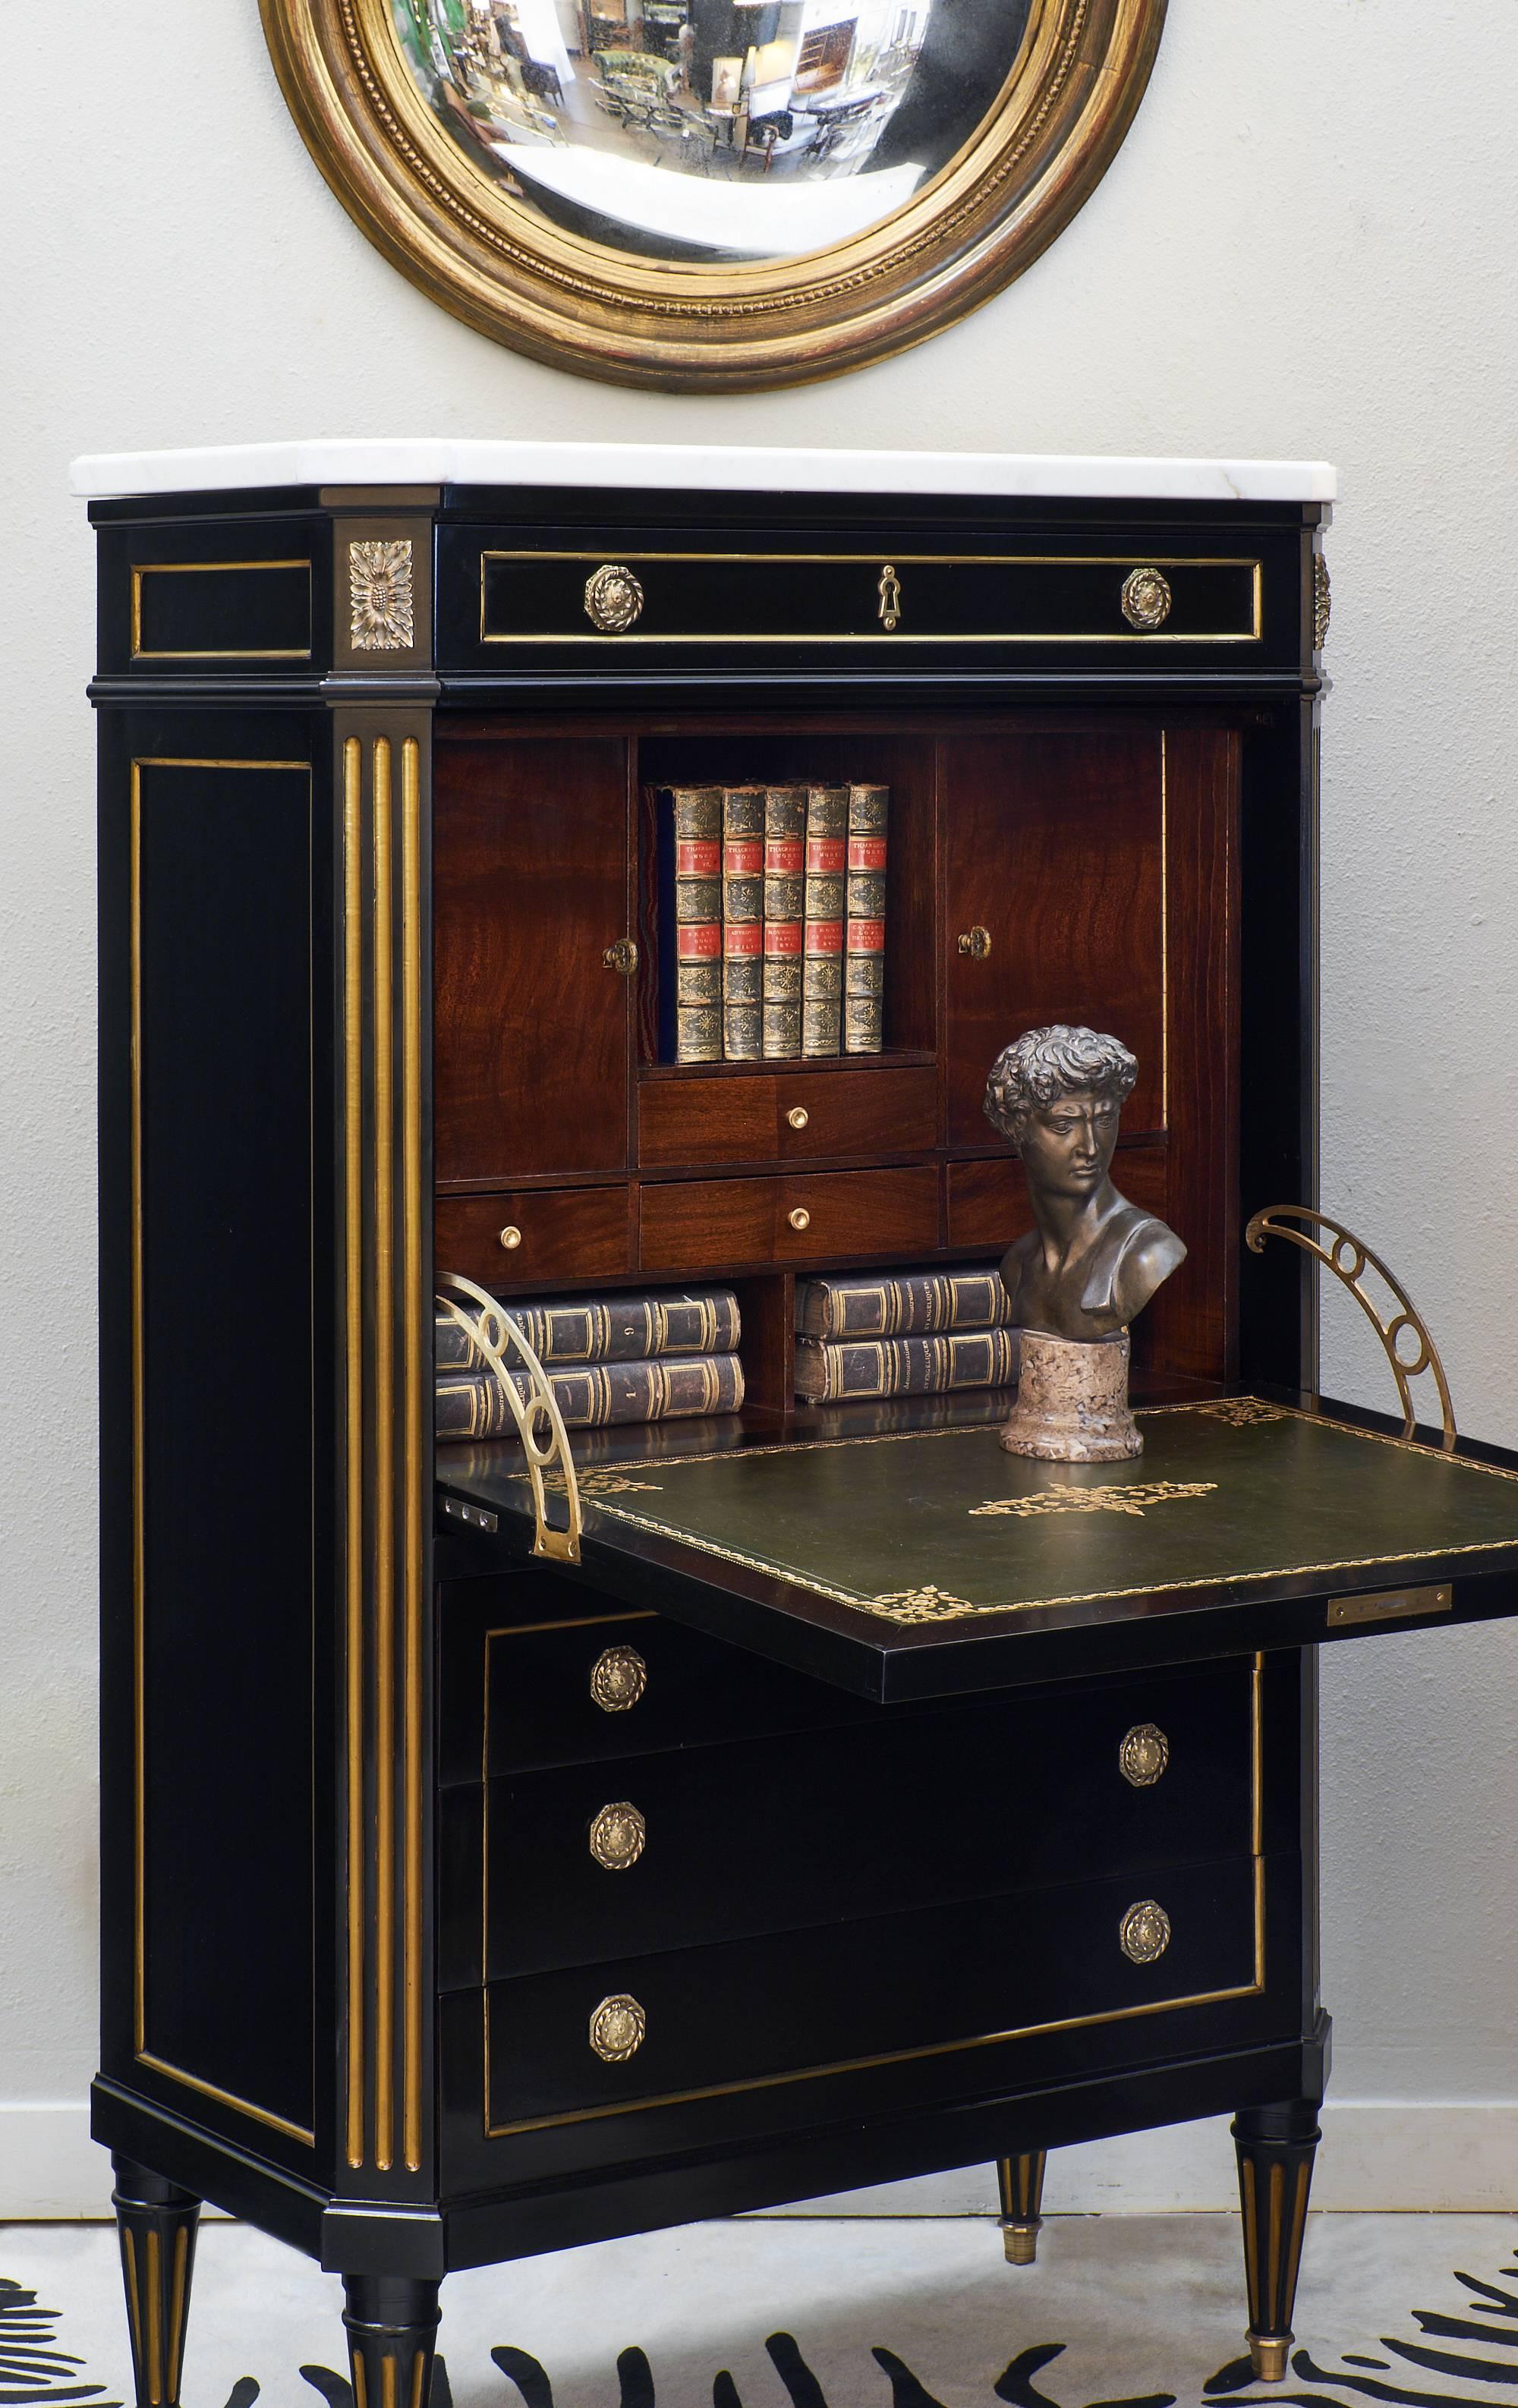 This is a wonderfully crafted piece! The ebonized and French polished wood has a high luster, museum quality finish. Topped with a thick Carrara marble slab in great condition, this secretaire also features gilt trims throughout. The secretaire has